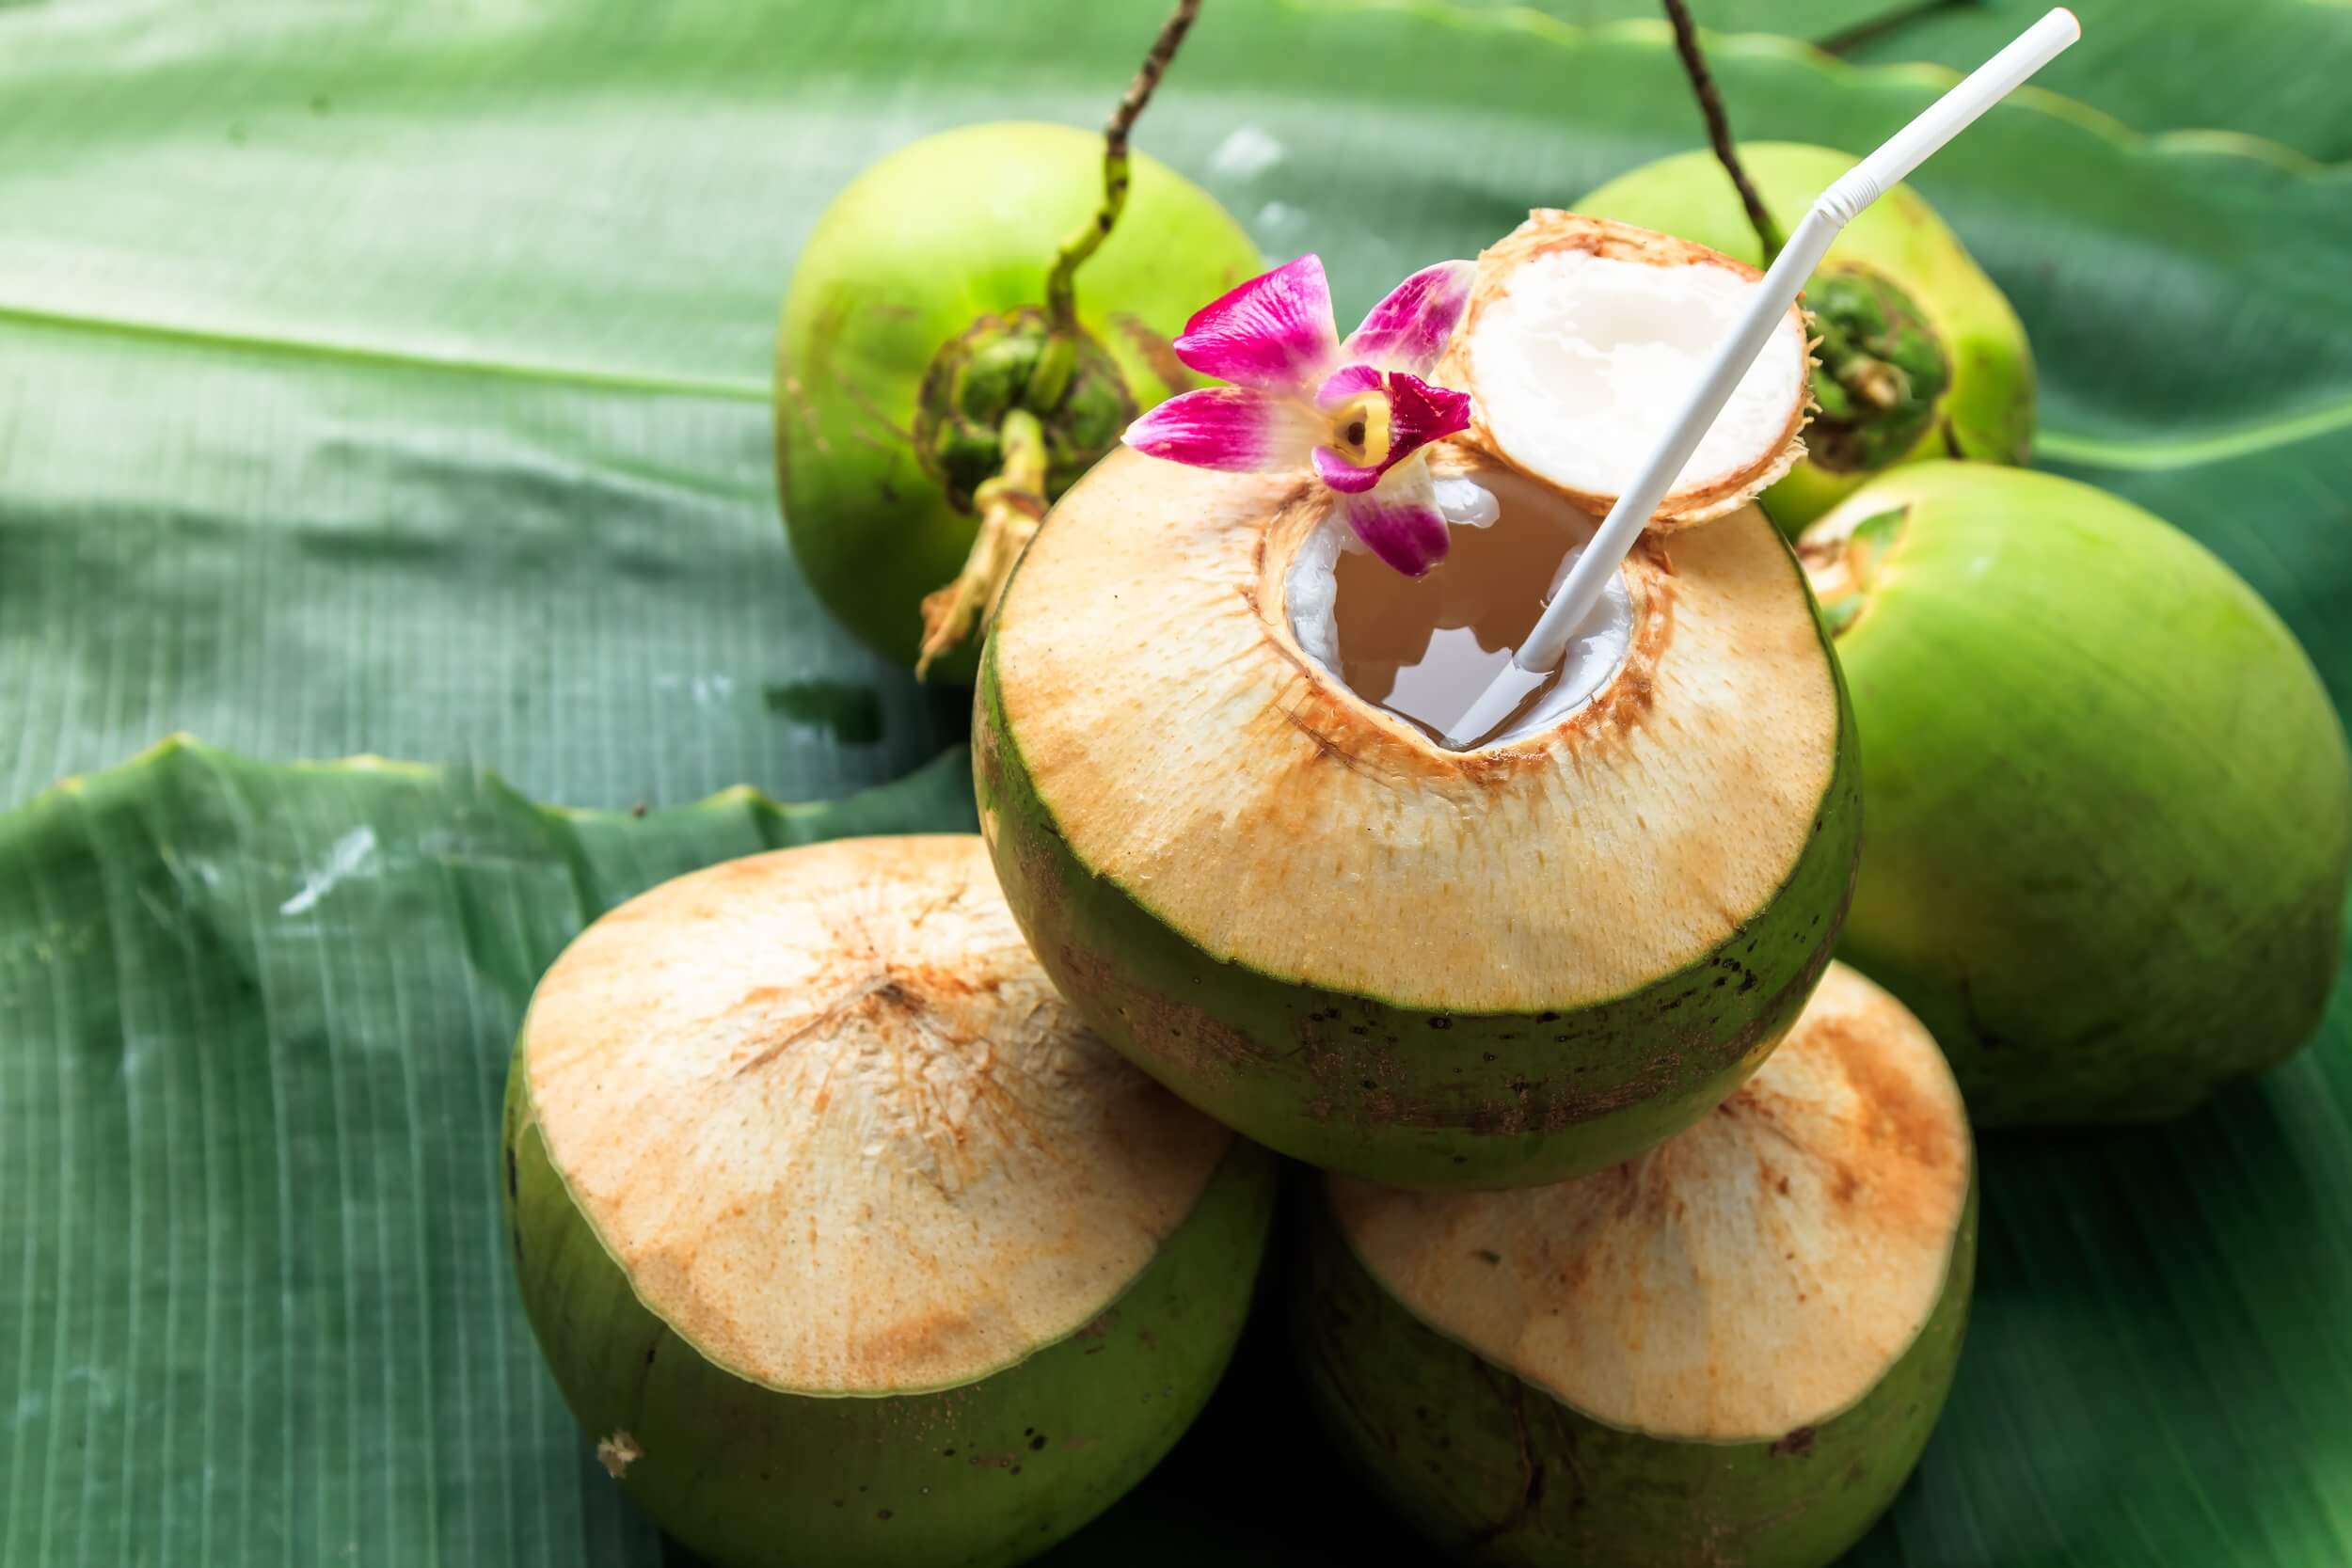 Know the incredible health benefits of coconut water and the best time to drink